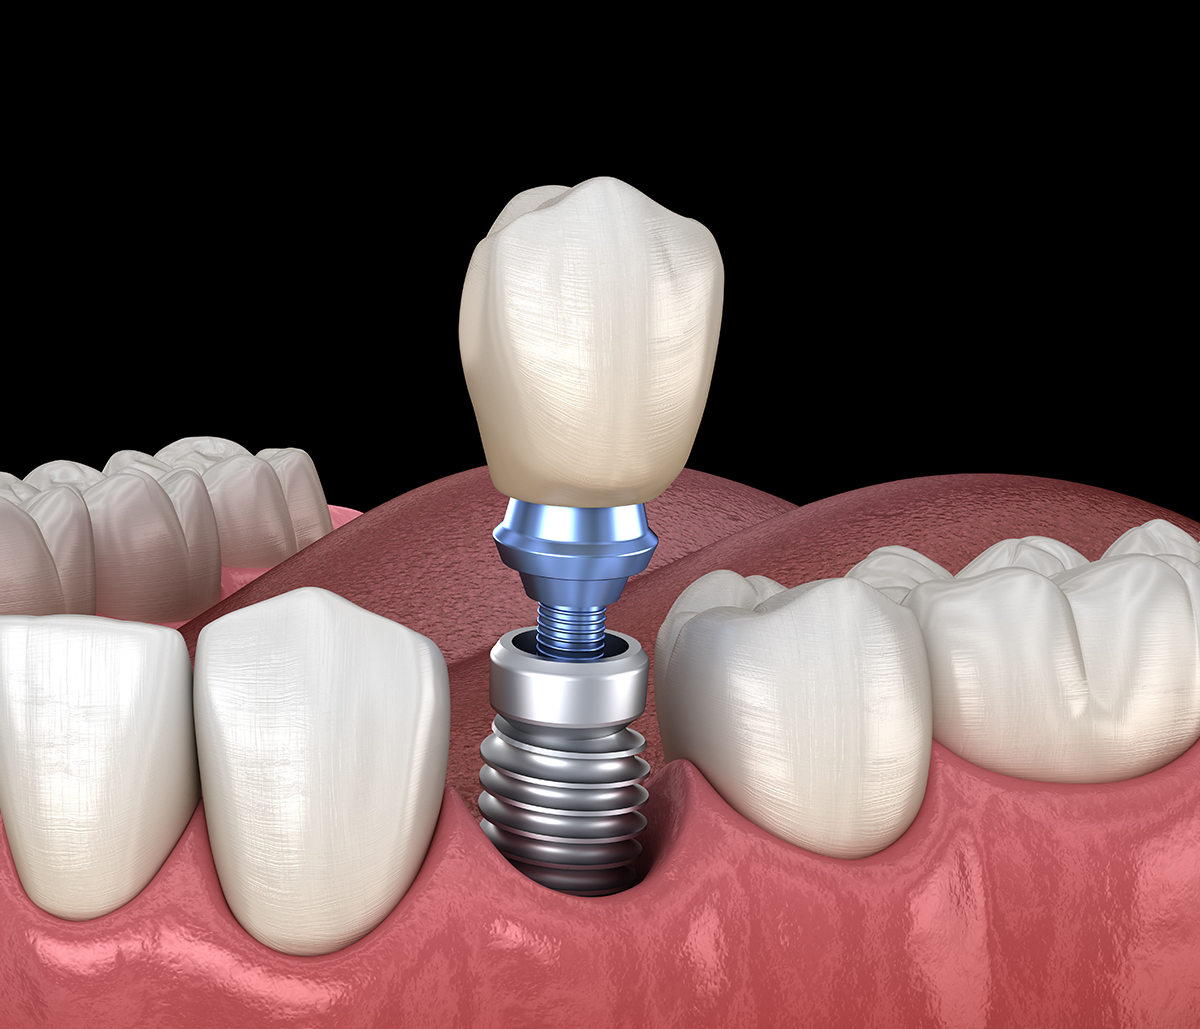 What are the benefits of metal-free ceramic dental implants in San Francisco Area